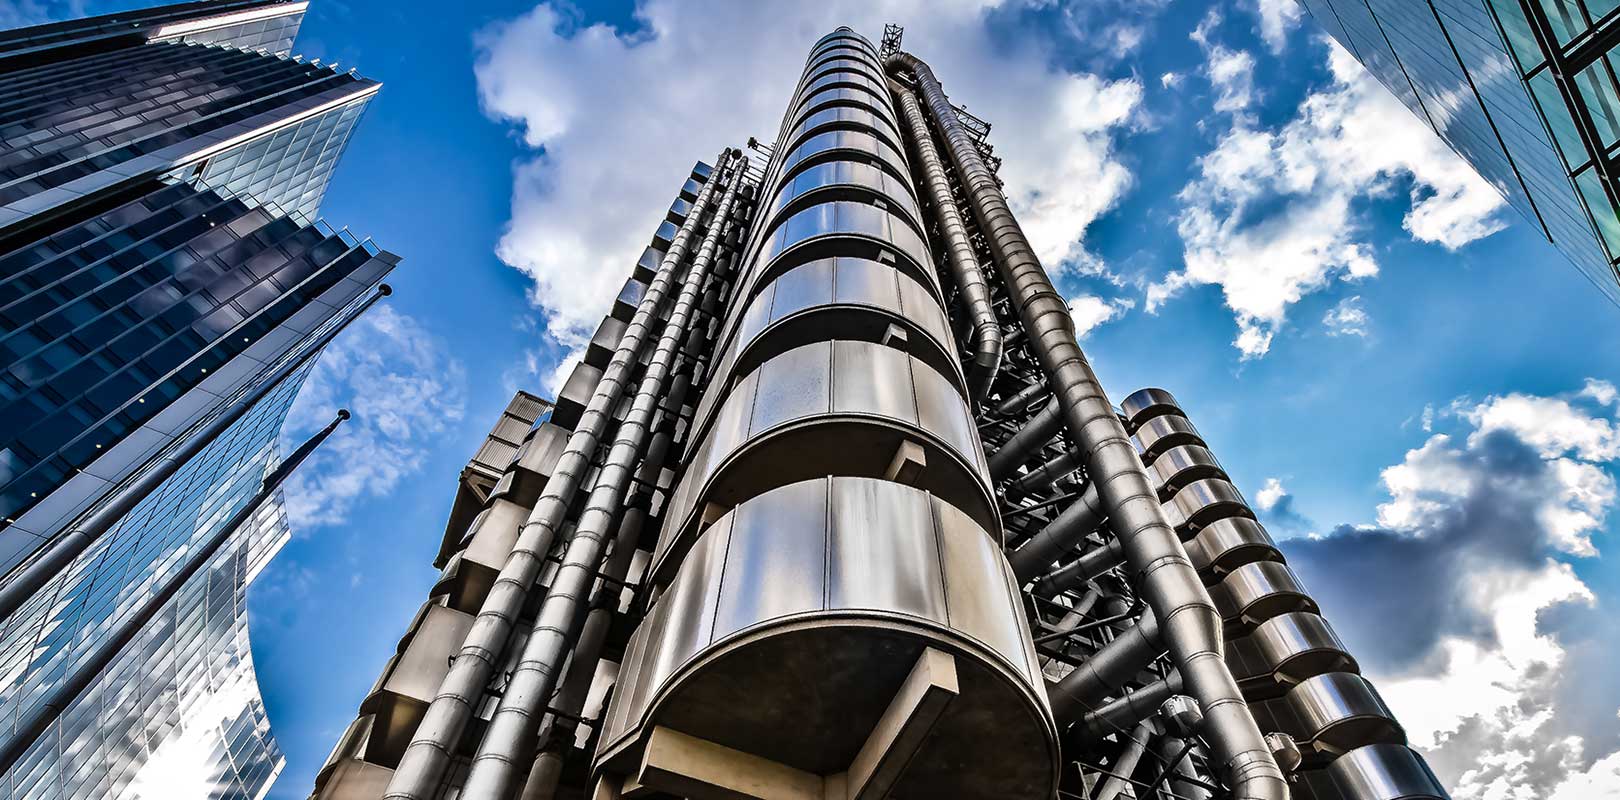 A photo of the Lloyds insurance building in London